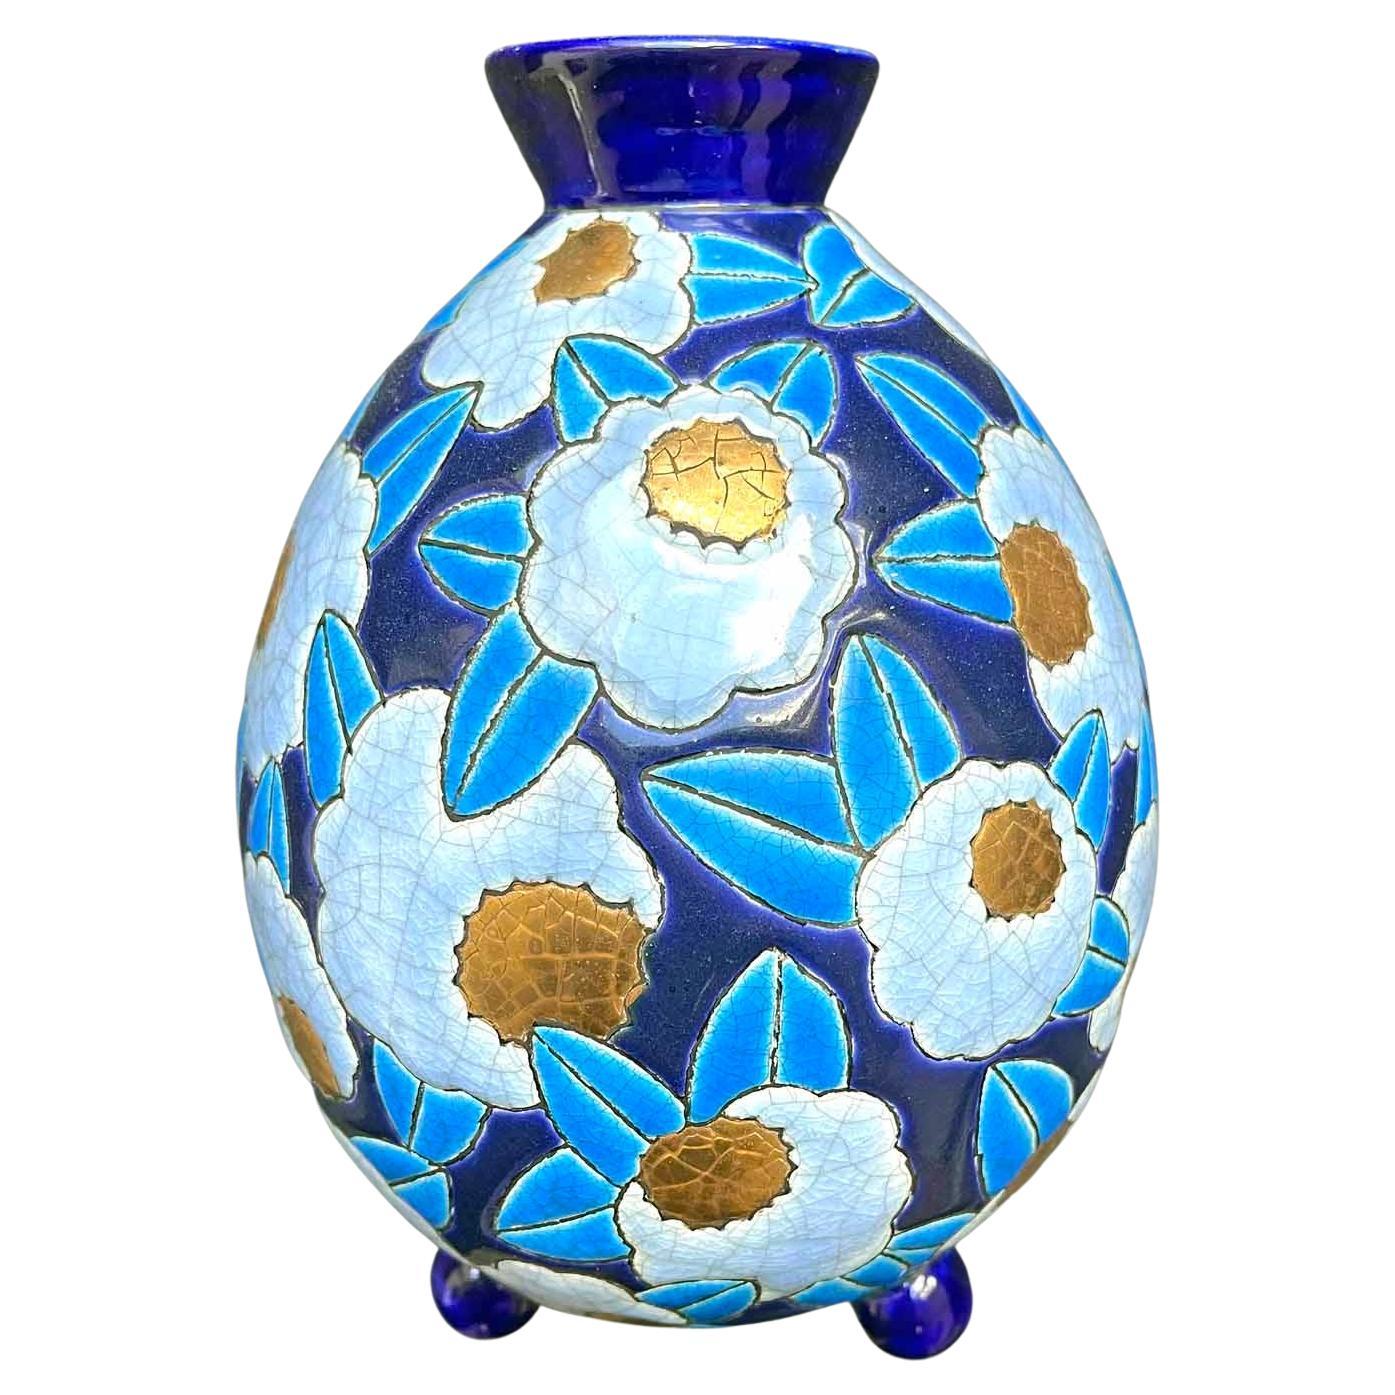 Unusual Art Deco Vase with Flowers in Blue and Gold by Longwy, France